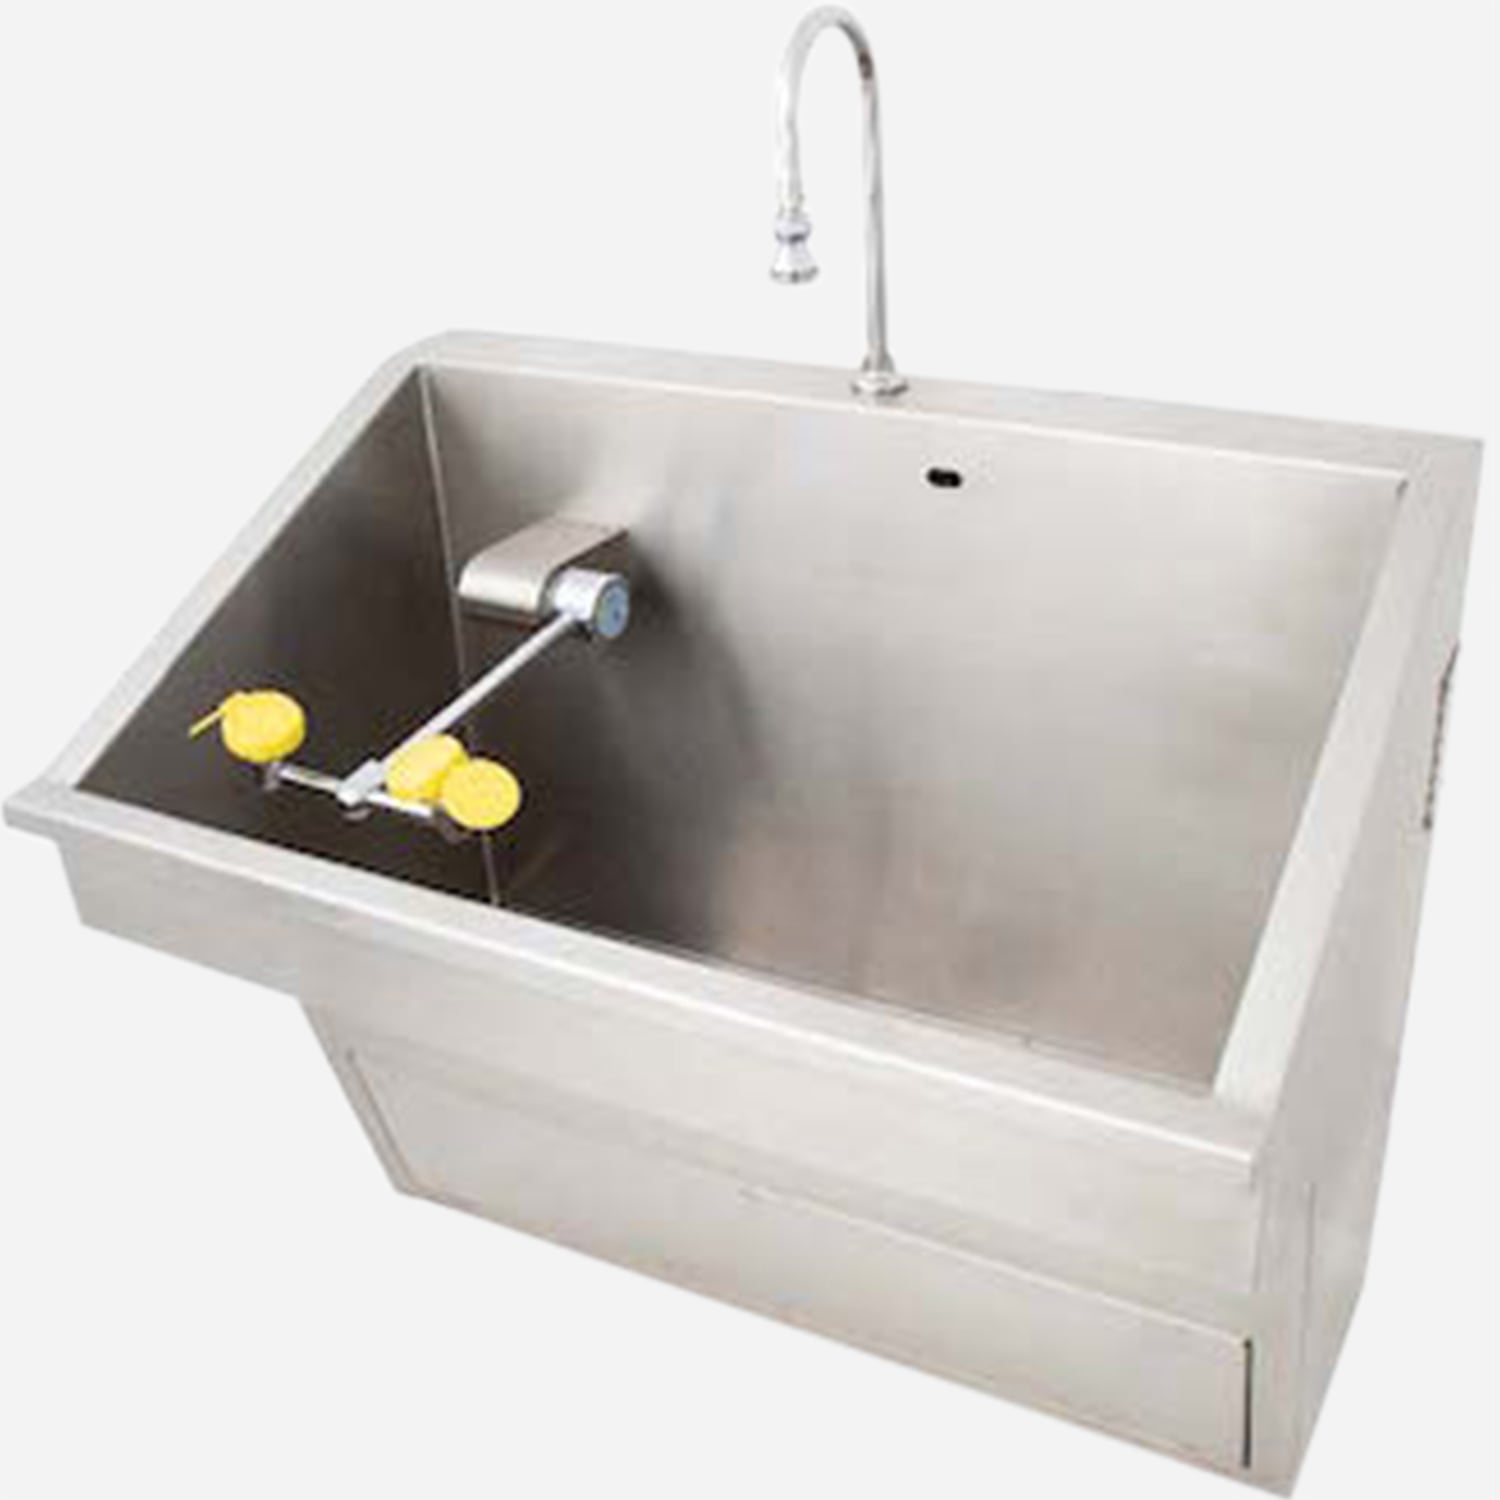 New Stainless Steel Scrub Sink With Eye Face Wash